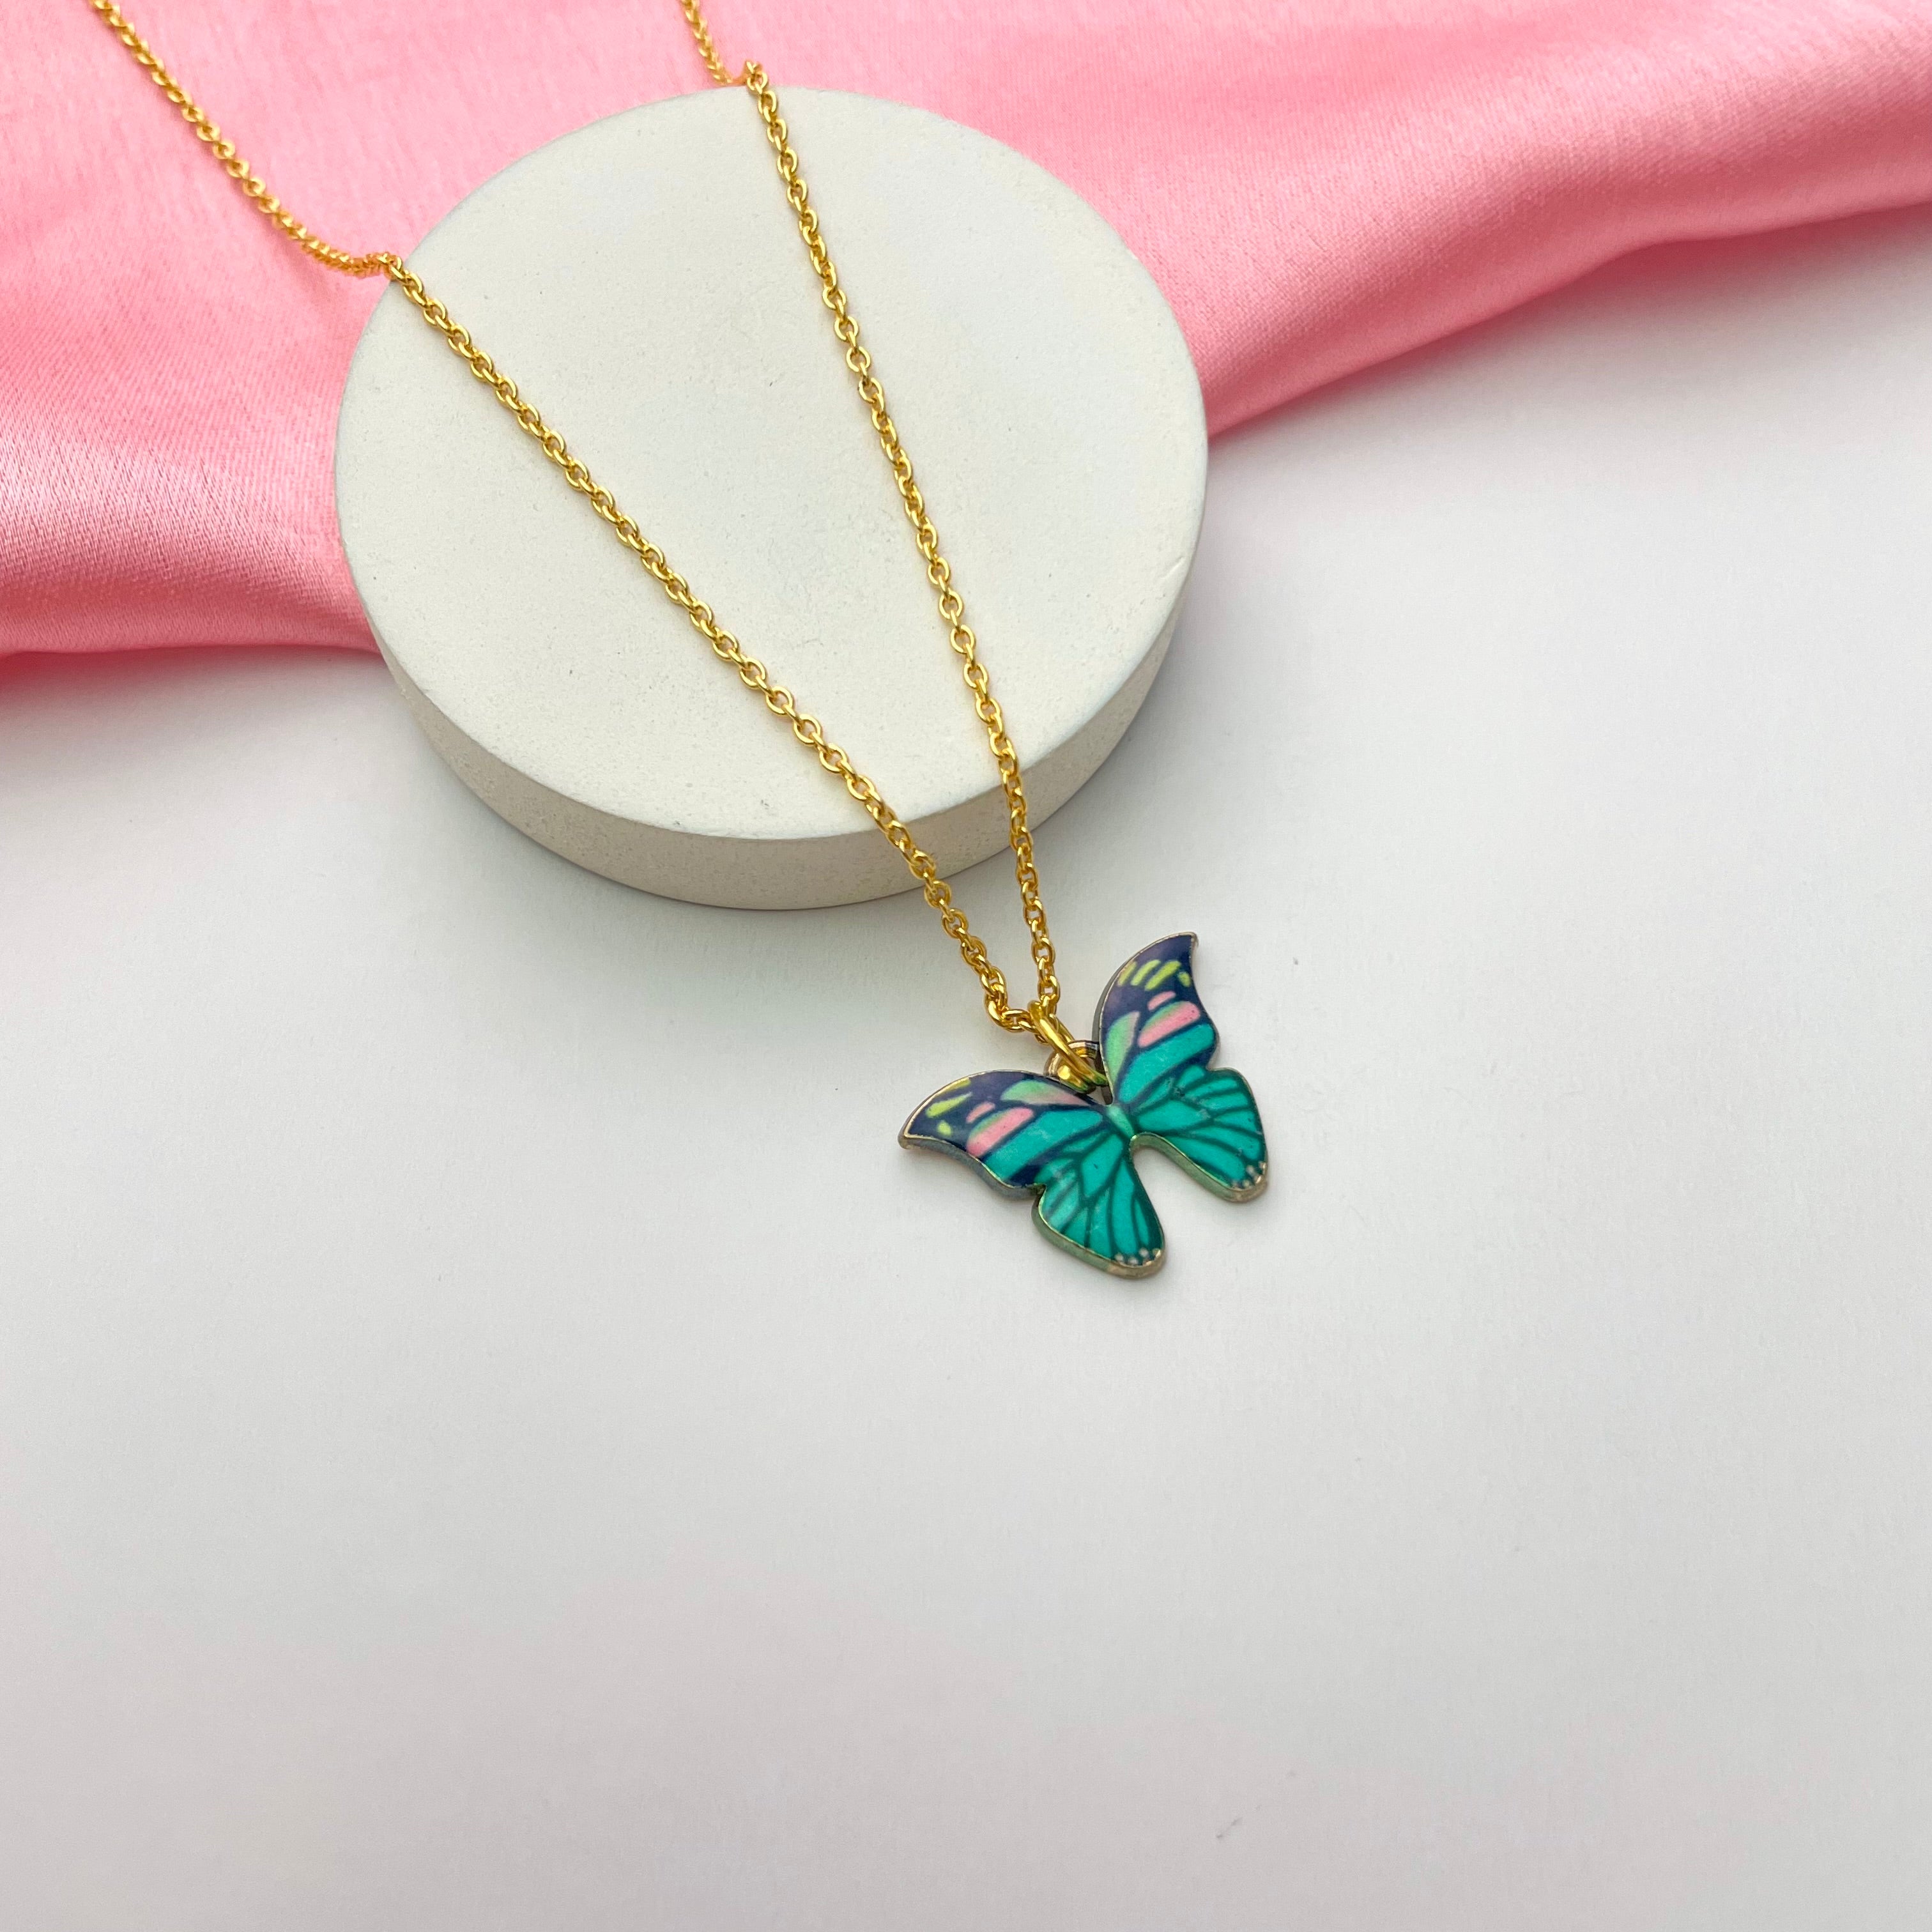 Long butterfly necklace